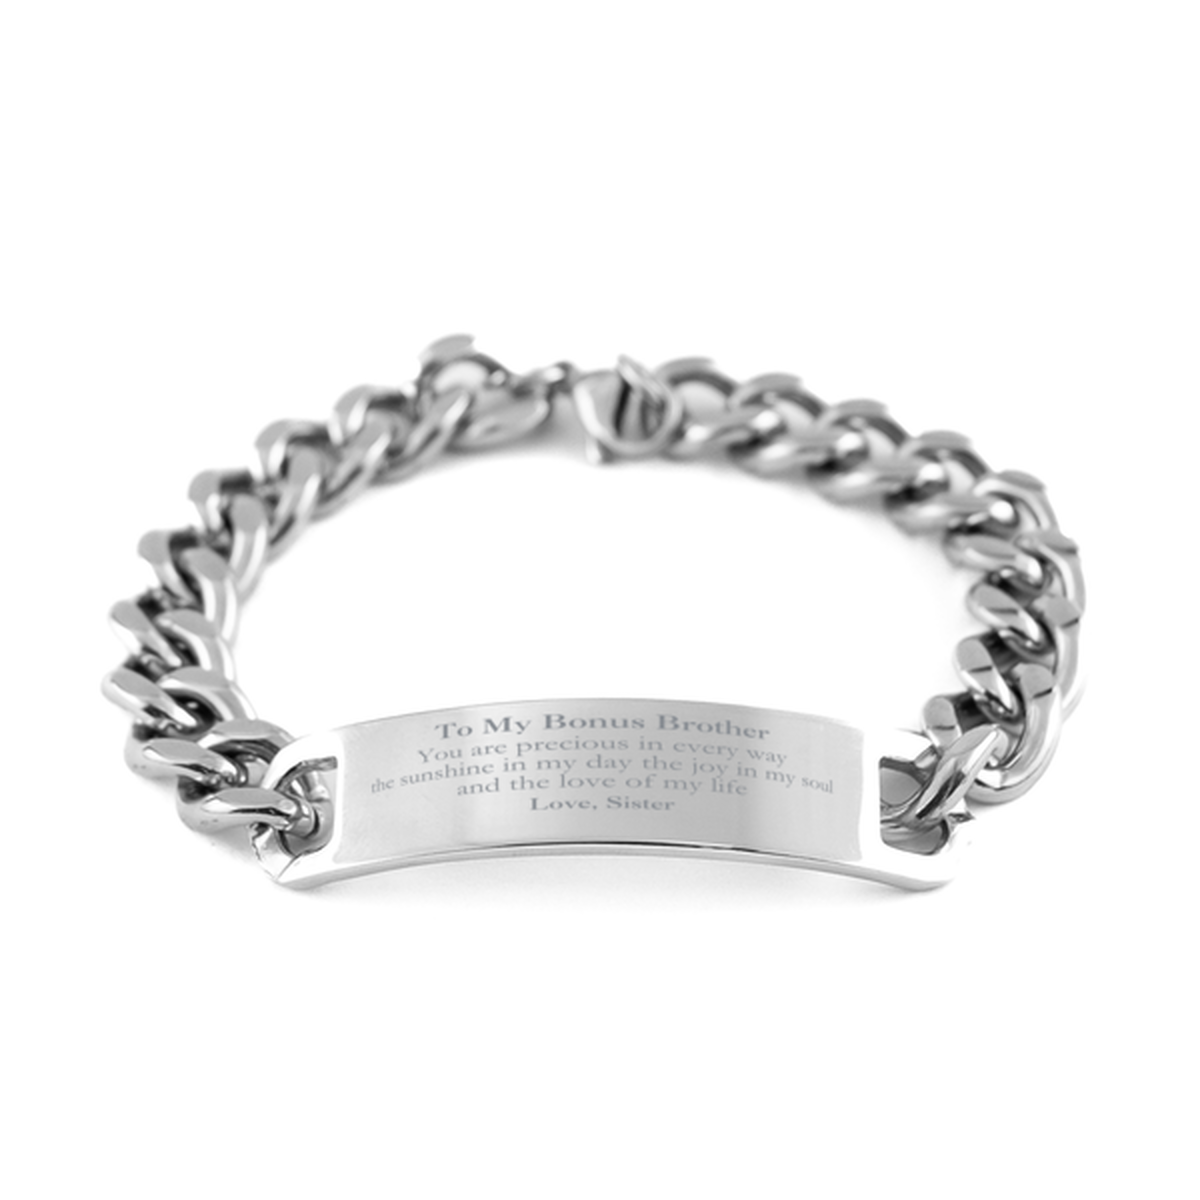 Graduation Gifts for Bonus Brother Cuban Chain Stainless Steel Bracelet Present from Sister, Christmas Bonus Brother Birthday Gifts Bonus Brother You are precious in every way the sunshine in my day. Love, Sister